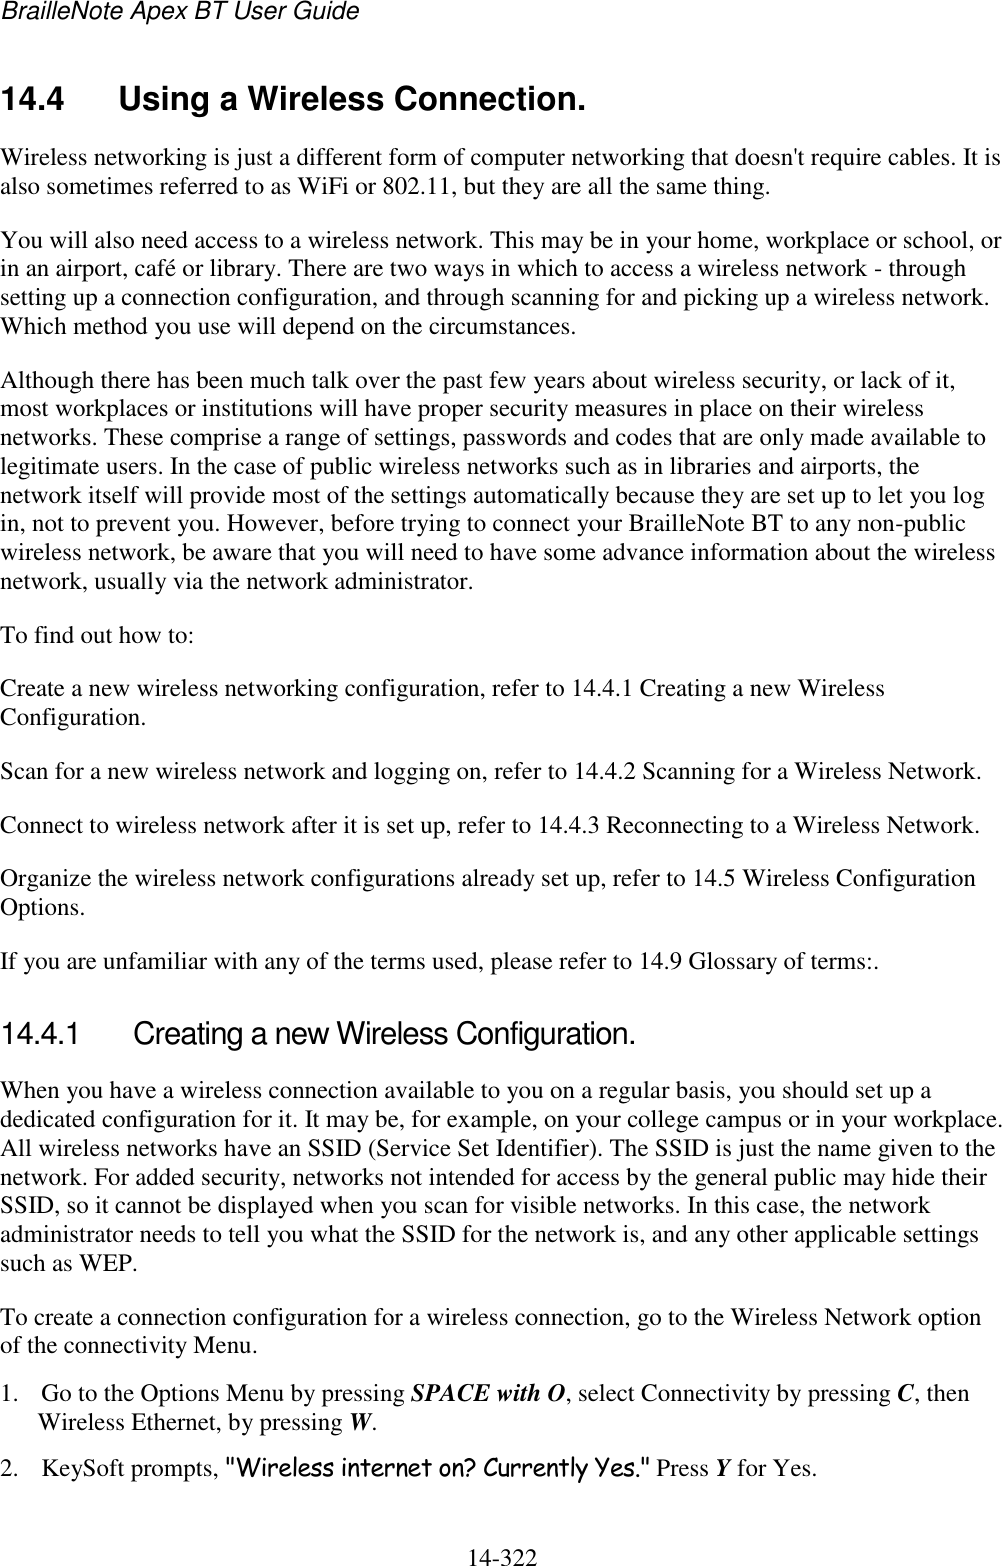 BrailleNote Apex BT User Guide   14-322   14.4  Using a Wireless Connection. Wireless networking is just a different form of computer networking that doesn&apos;t require cables. It is also sometimes referred to as WiFi or 802.11, but they are all the same thing. You will also need access to a wireless network. This may be in your home, workplace or school, or in an airport, café or library. There are two ways in which to access a wireless network - through setting up a connection configuration, and through scanning for and picking up a wireless network. Which method you use will depend on the circumstances. Although there has been much talk over the past few years about wireless security, or lack of it, most workplaces or institutions will have proper security measures in place on their wireless networks. These comprise a range of settings, passwords and codes that are only made available to legitimate users. In the case of public wireless networks such as in libraries and airports, the network itself will provide most of the settings automatically because they are set up to let you log in, not to prevent you. However, before trying to connect your BrailleNote BT to any non-public wireless network, be aware that you will need to have some advance information about the wireless network, usually via the network administrator. To find out how to: Create a new wireless networking configuration, refer to 14.4.1 Creating a new Wireless Configuration. Scan for a new wireless network and logging on, refer to 14.4.2 Scanning for a Wireless Network. Connect to wireless network after it is set up, refer to 14.4.3 Reconnecting to a Wireless Network. Organize the wireless network configurations already set up, refer to 14.5 Wireless Configuration Options. If you are unfamiliar with any of the terms used, please refer to 14.9 Glossary of terms:.   14.4.1  Creating a new Wireless Configuration. When you have a wireless connection available to you on a regular basis, you should set up a dedicated configuration for it. It may be, for example, on your college campus or in your workplace. All wireless networks have an SSID (Service Set Identifier). The SSID is just the name given to the network. For added security, networks not intended for access by the general public may hide their SSID, so it cannot be displayed when you scan for visible networks. In this case, the network administrator needs to tell you what the SSID for the network is, and any other applicable settings such as WEP. To create a connection configuration for a wireless connection, go to the Wireless Network option of the connectivity Menu. 1. Go to the Options Menu by pressing SPACE with O, select Connectivity by pressing C, then Wireless Ethernet, by pressing W. 2. KeySoft prompts, &quot;Wireless internet on? Currently Yes.&quot; Press Y for Yes. 